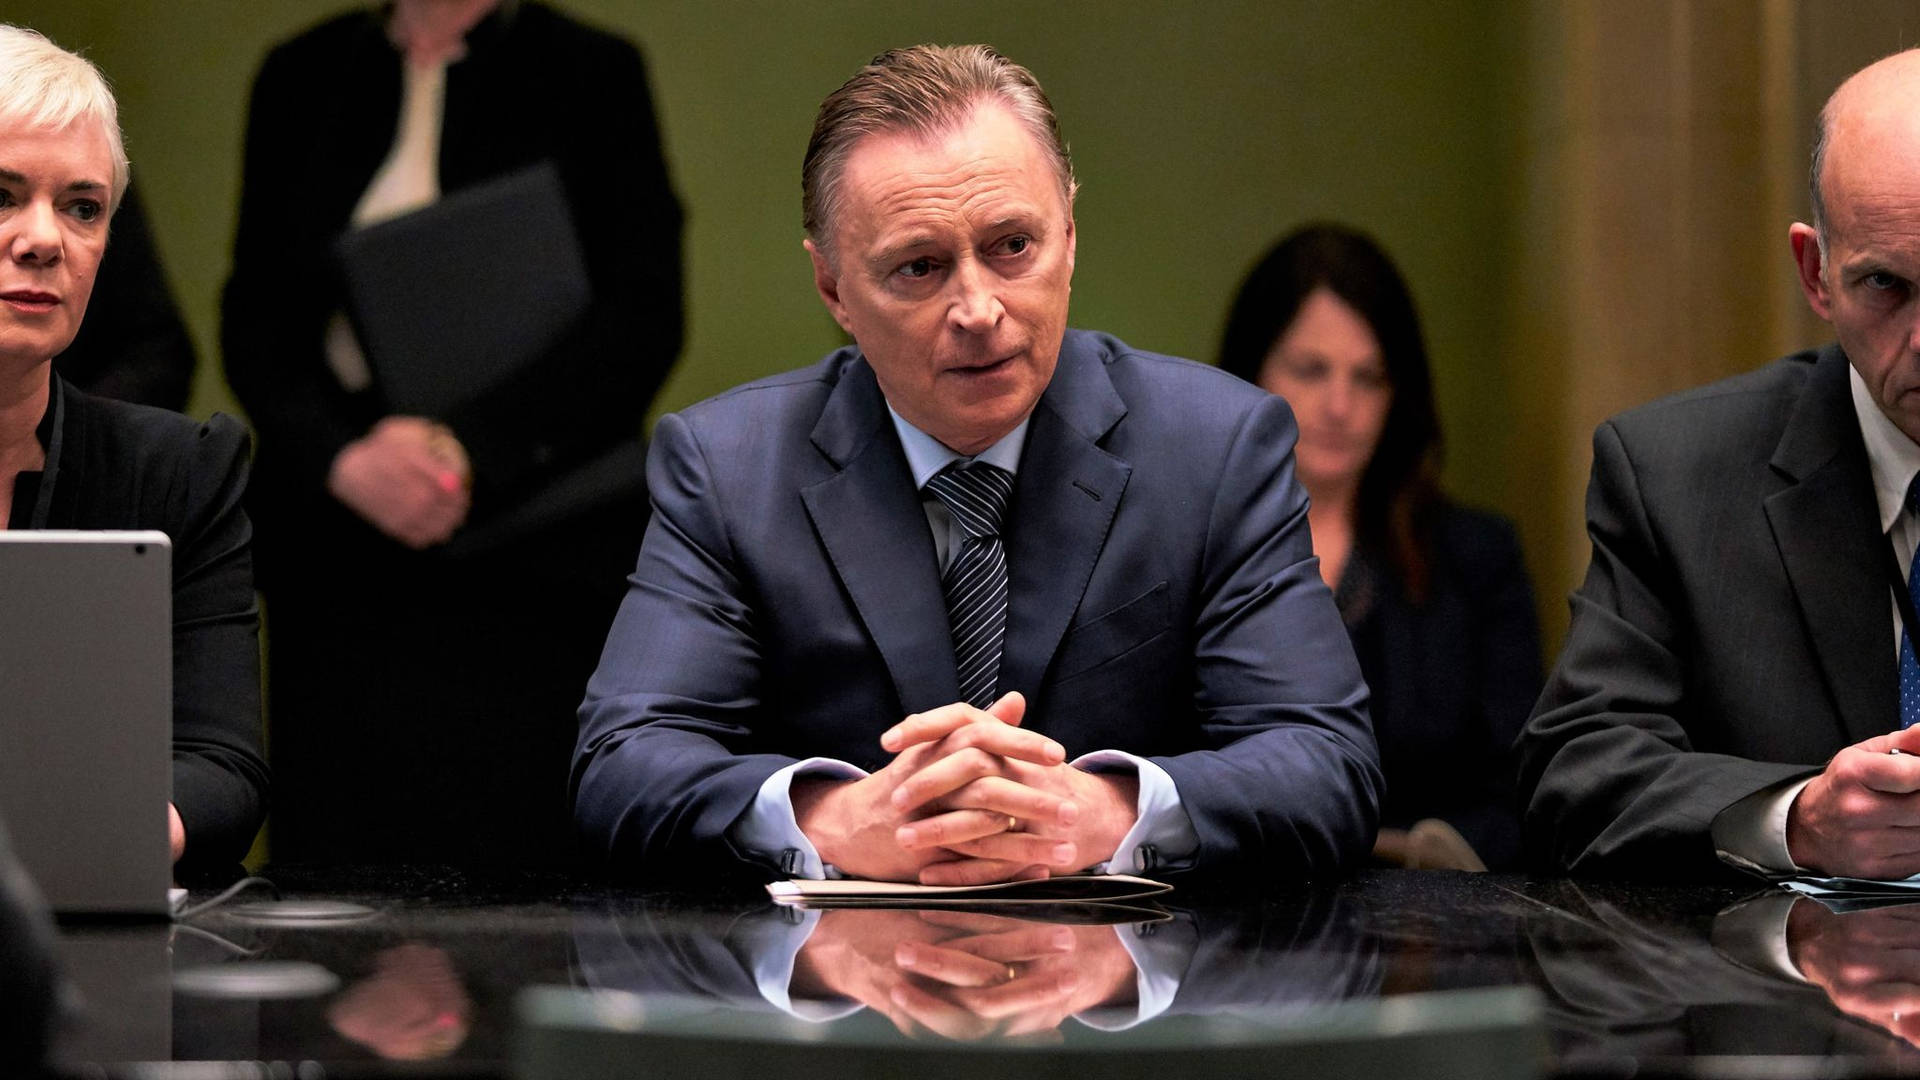 Robert Carlyle portraying the role of the Prime Minister Wallpaper